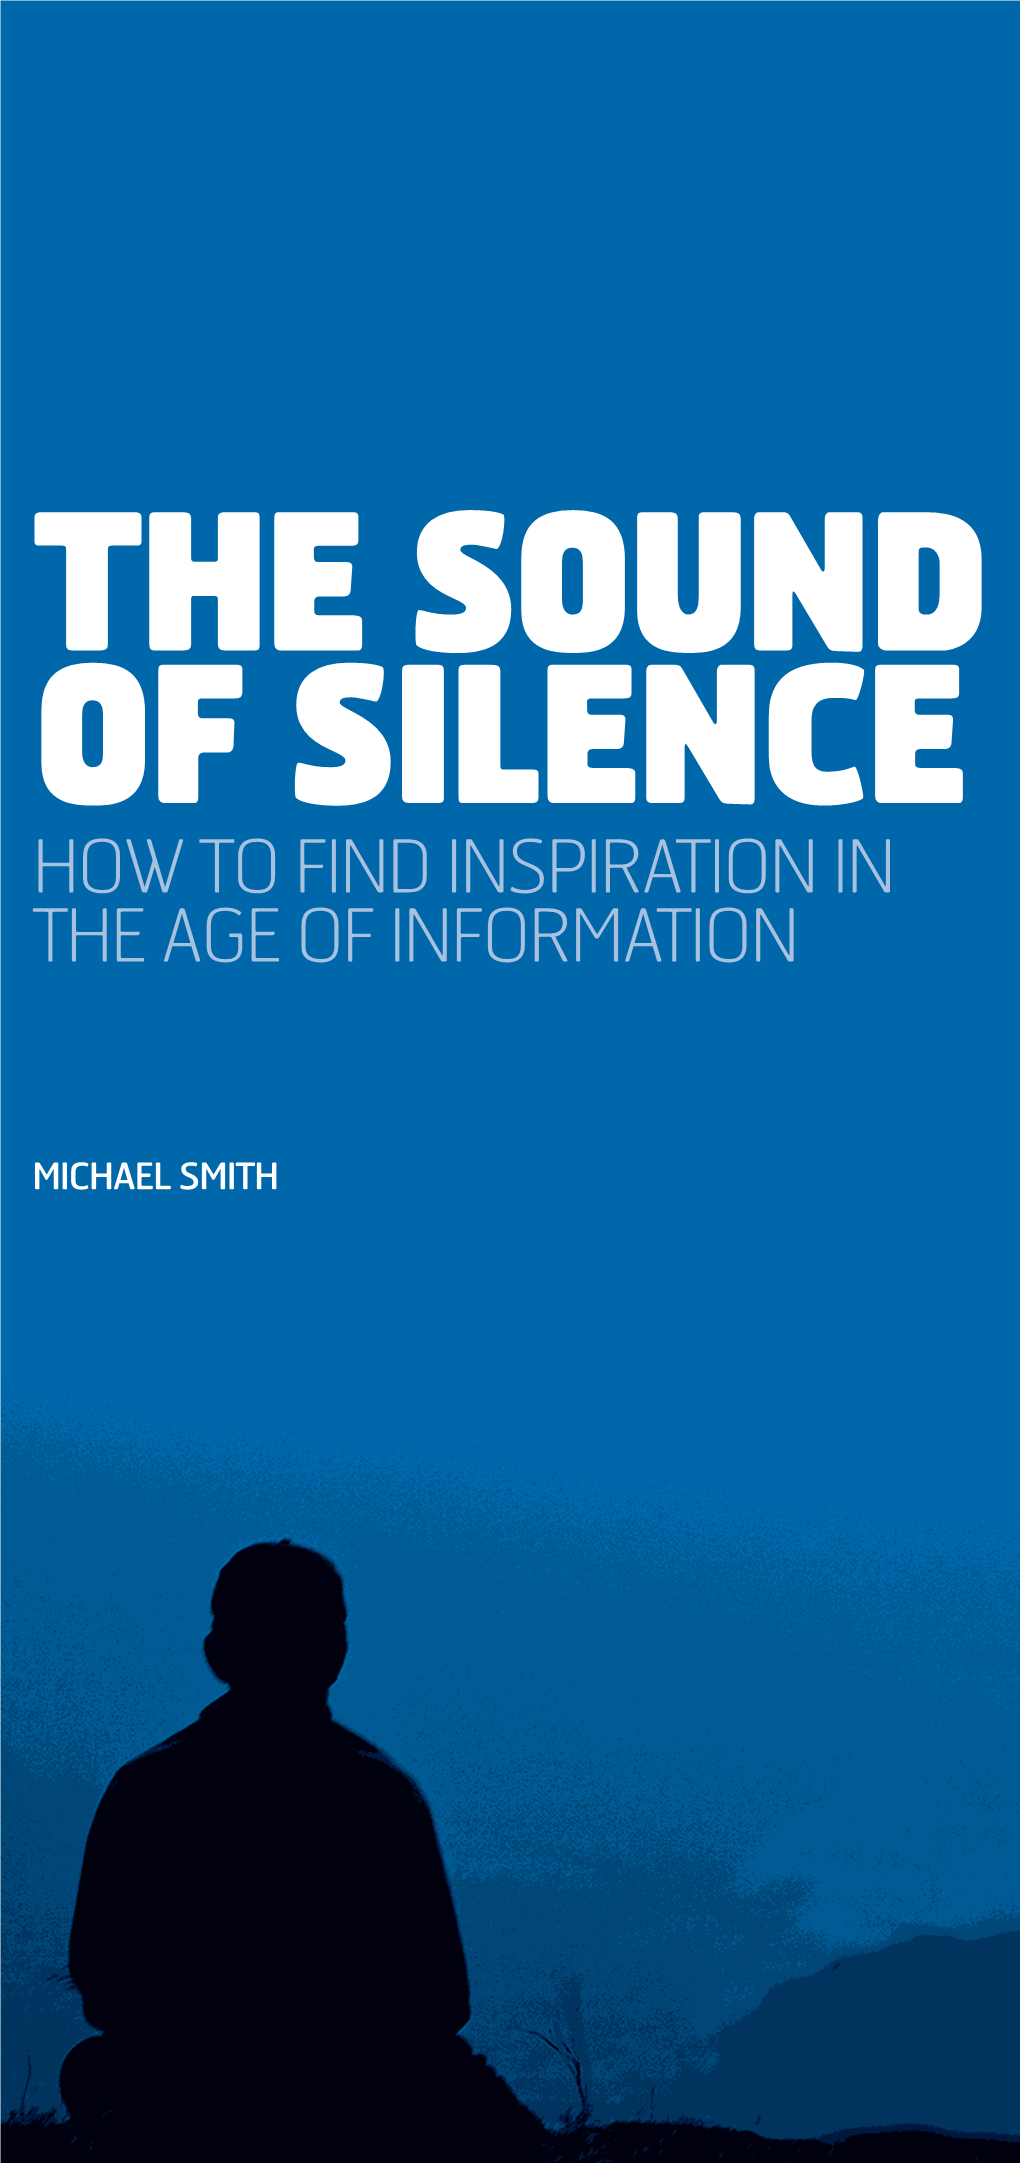 The Sound of Silence How to Find Inspiration in the Age of Information